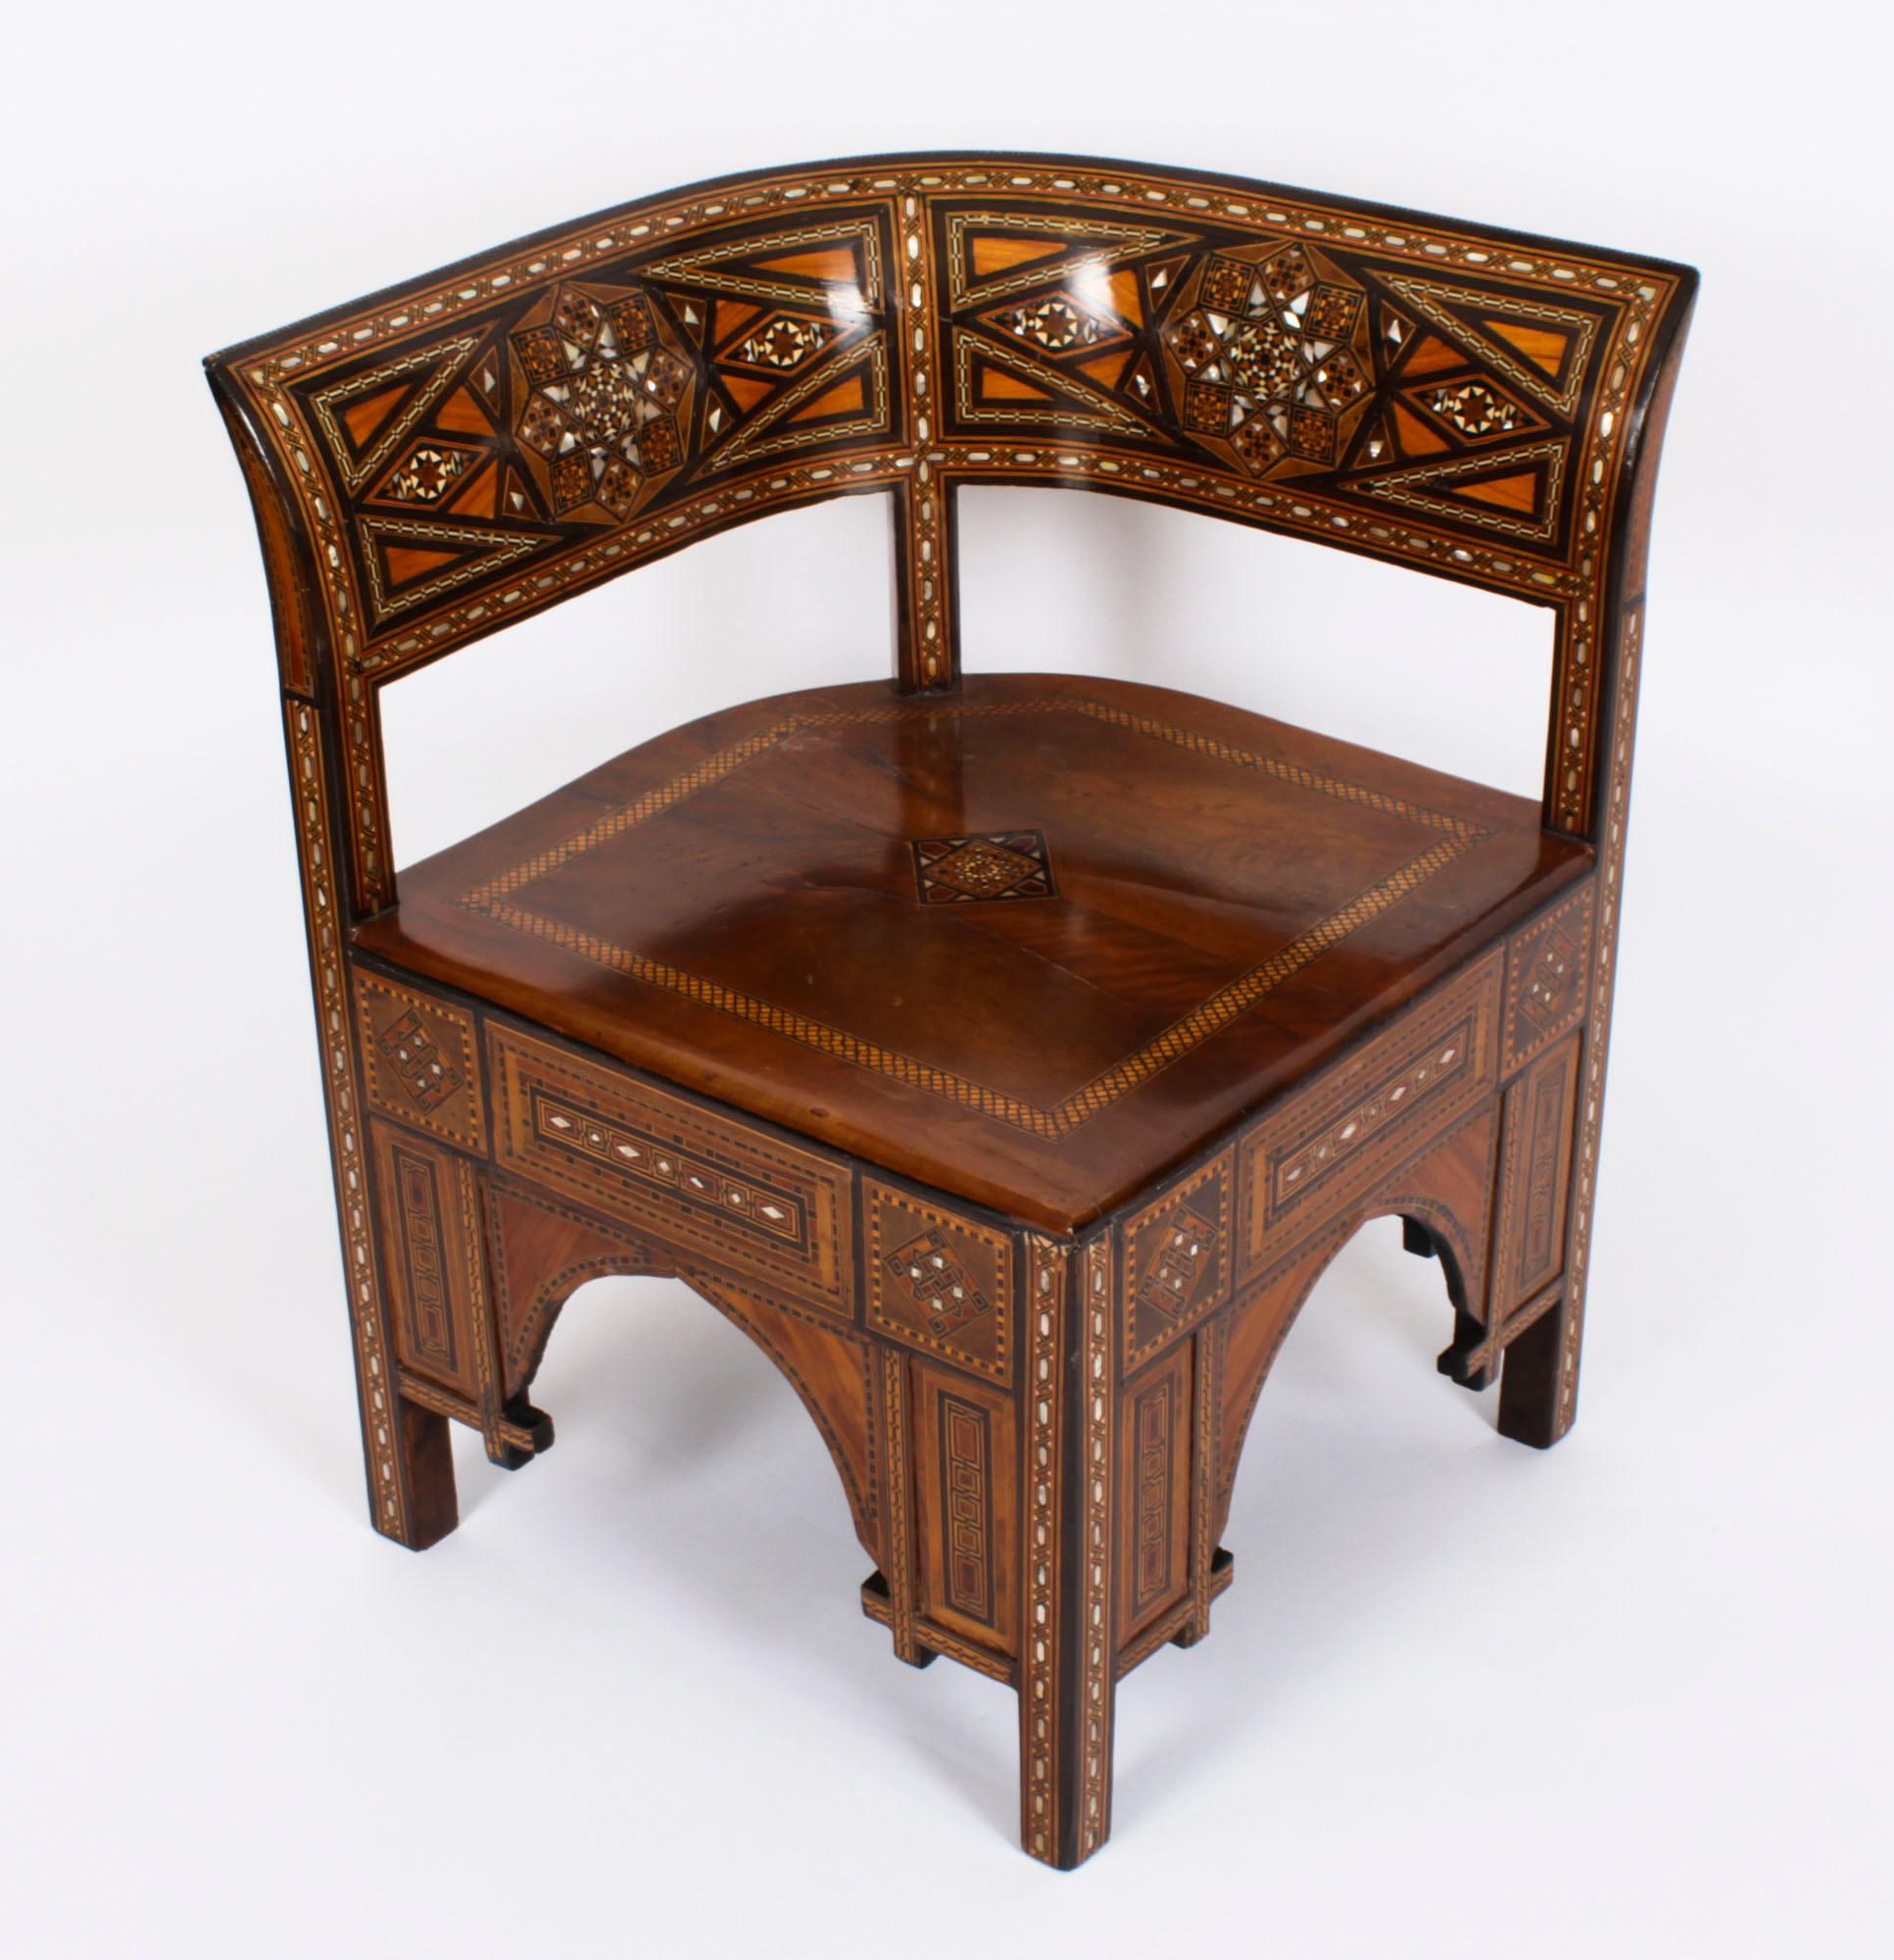 Antique Pair of Syrian Parquetry Inlaid Armchairs C1900 For Sale 6